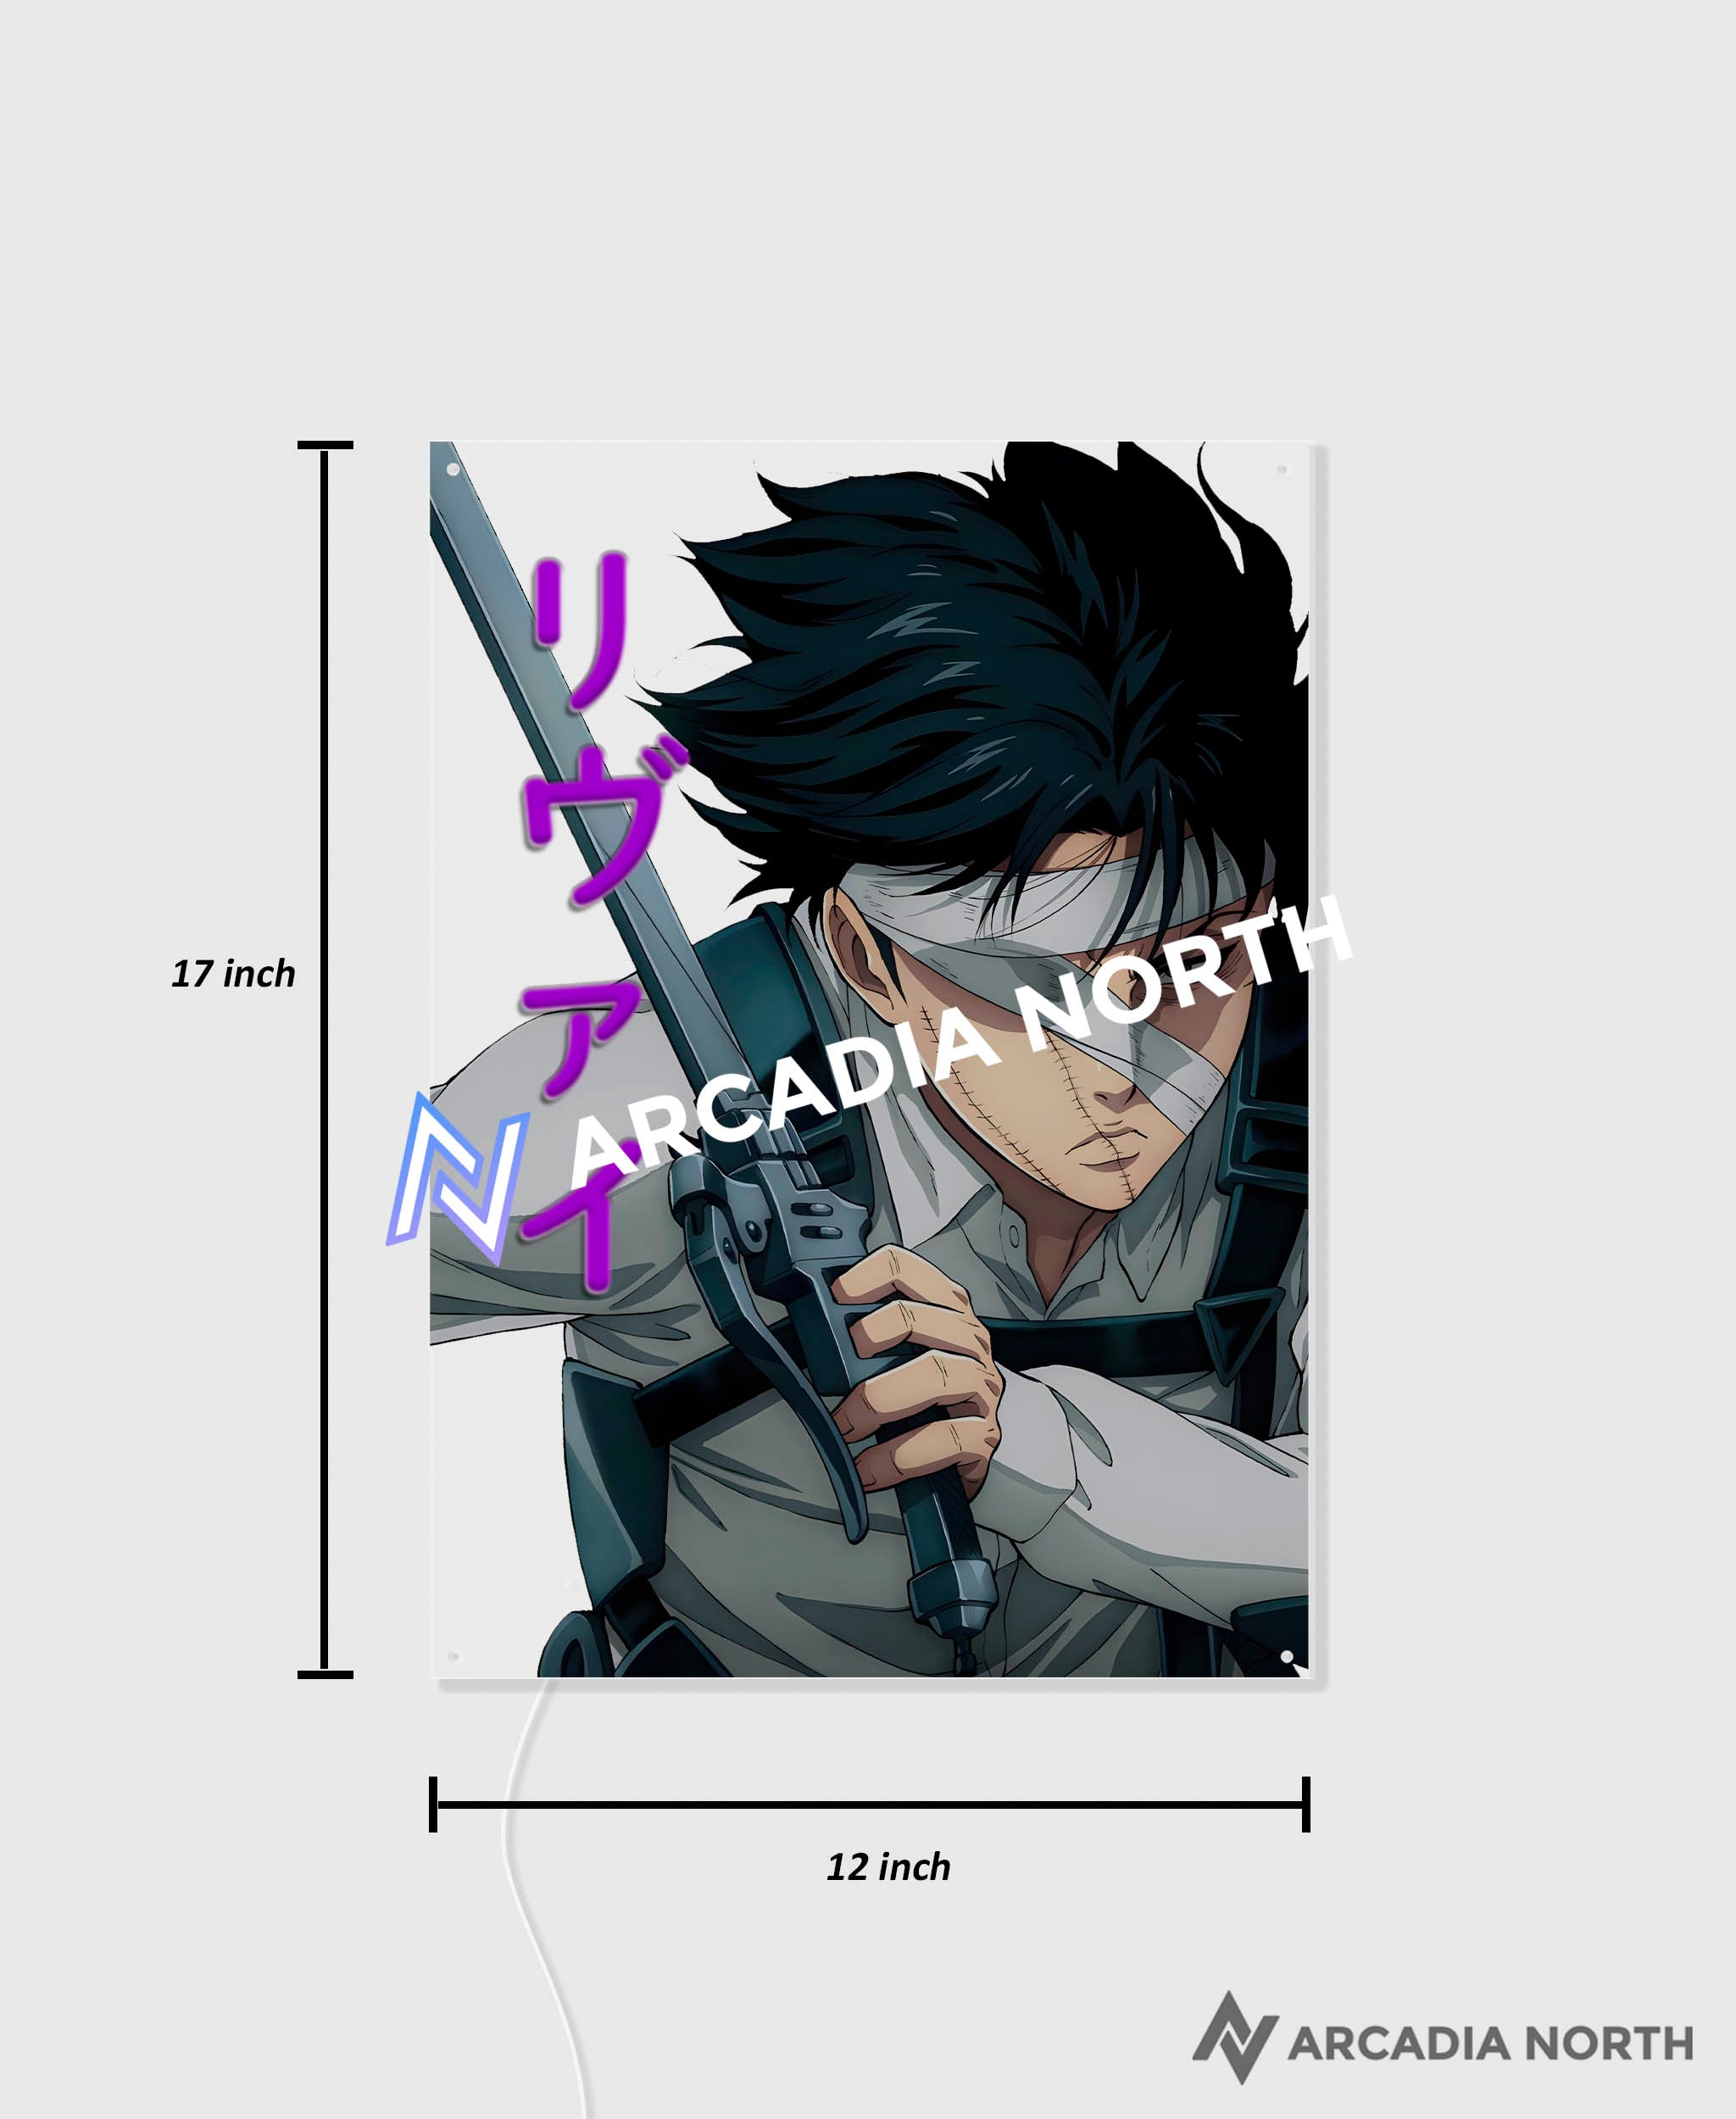 Arcadia North AURALIGHT Original LED Poster featuring the anime Attack on Titan with Levi Ackerman. Levi is written in Japanese Kana and illuminated by glowing neon LED lights. UV-printed on acrylic.